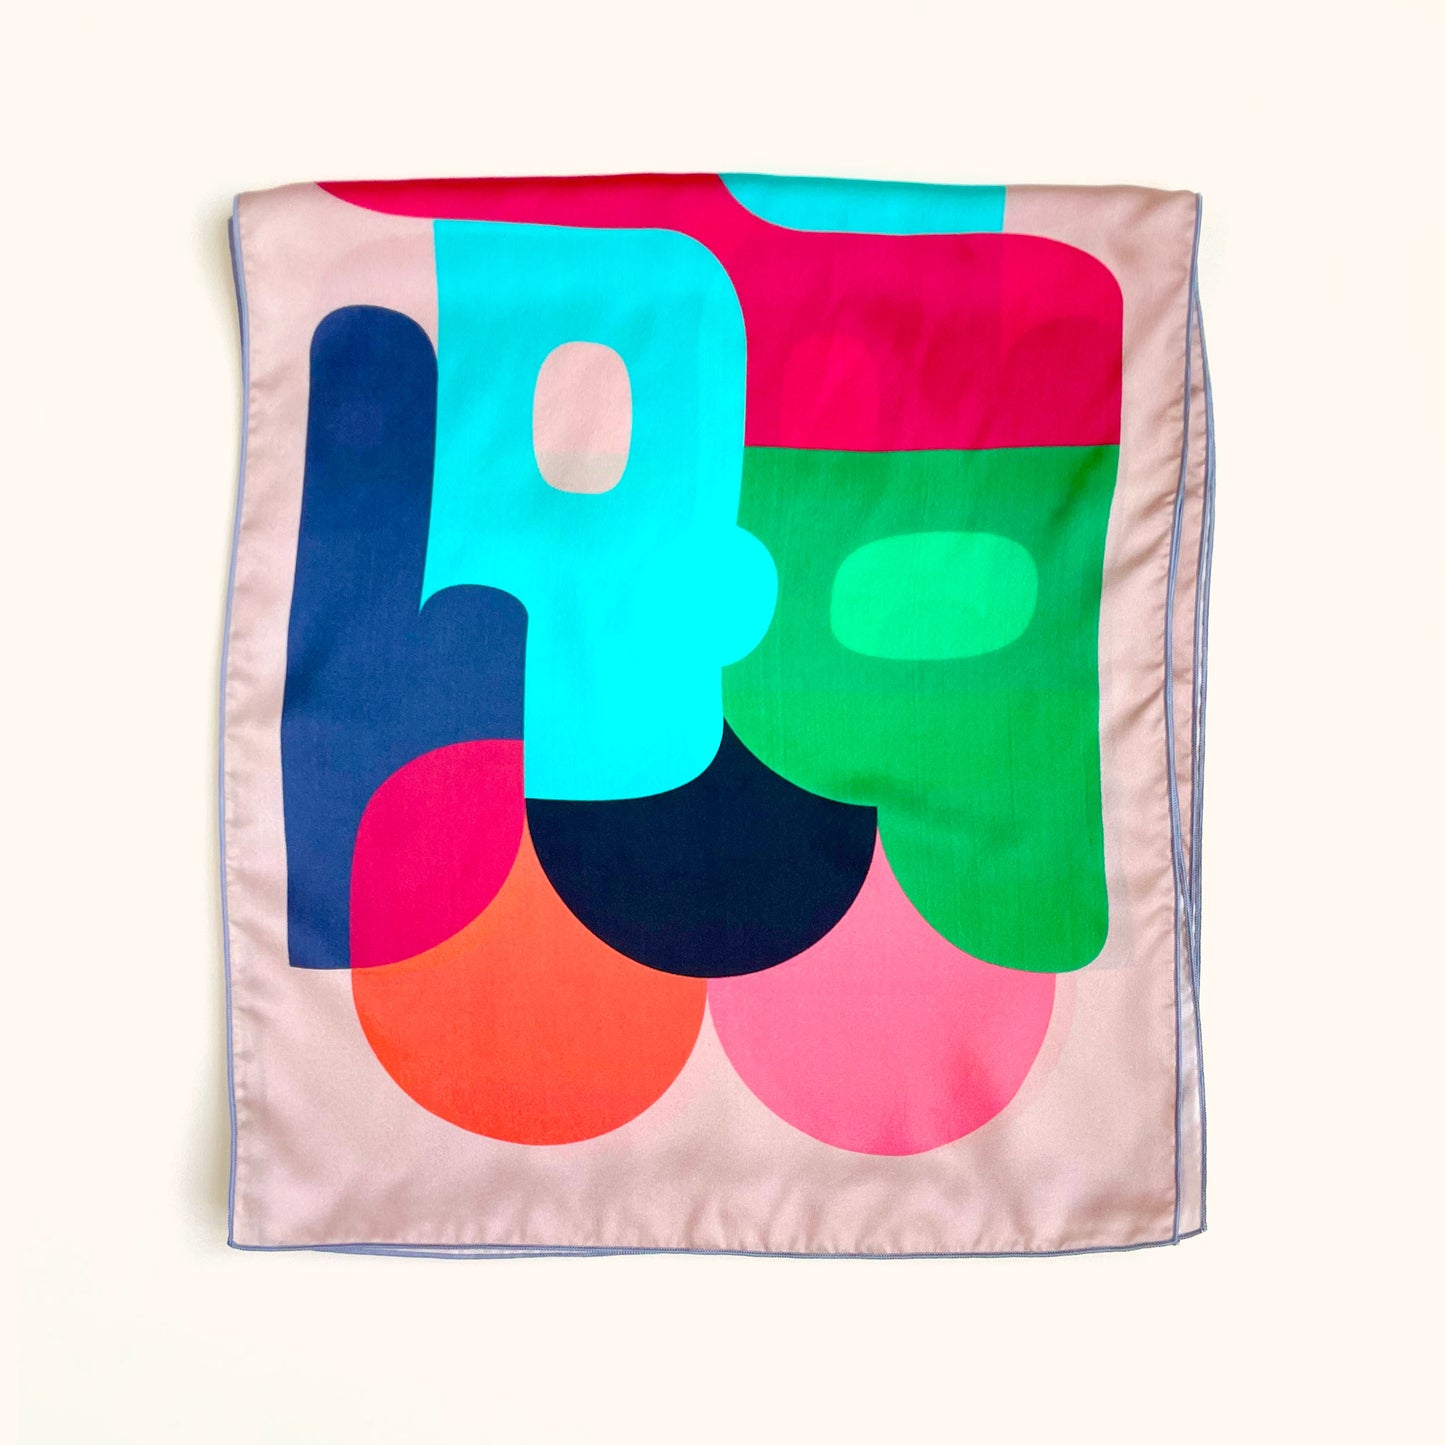 Luxe, long silk charmeuse scarf with 60s style abstract shapes and a mod vibe for dopamine dressing